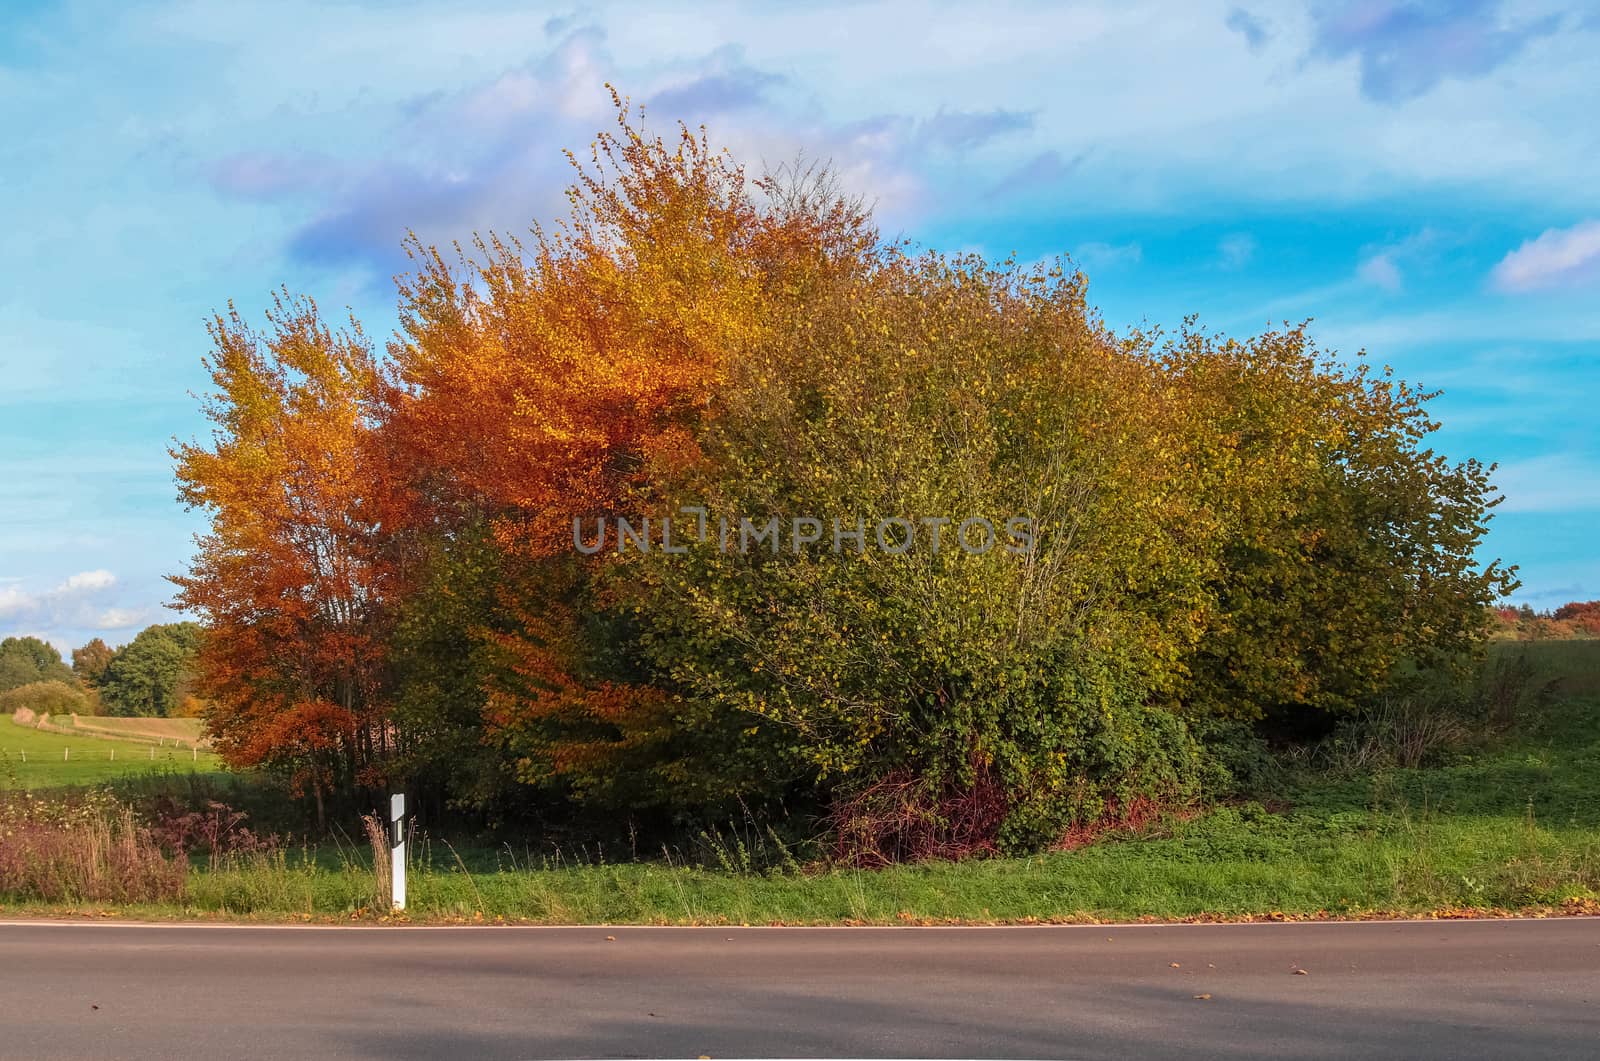 Beautiful autumn tree with orange and red colored leaves on a su by MP_foto71